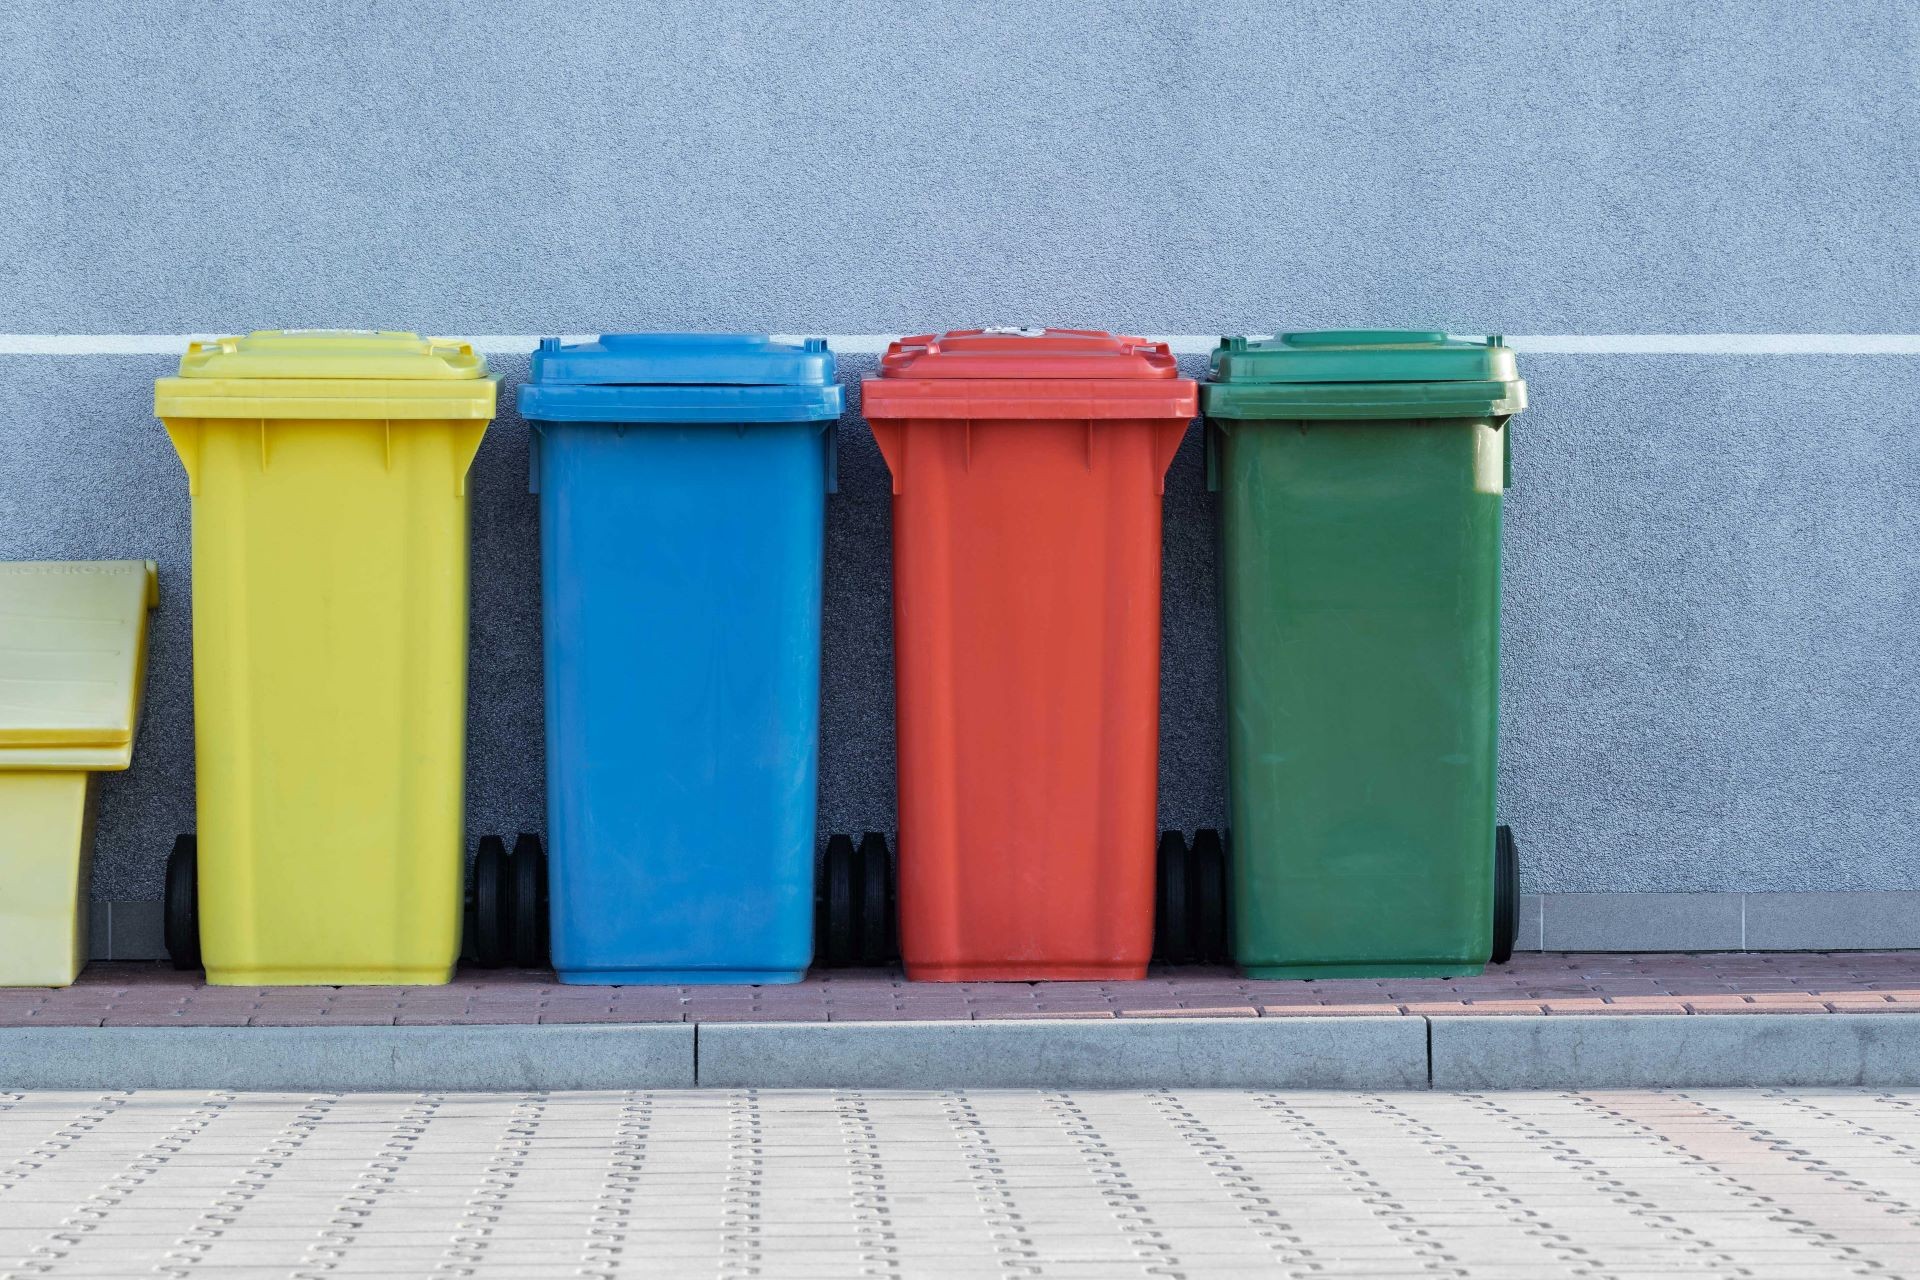 A set of four collection bins of different colours sit on the sidewalk against a building